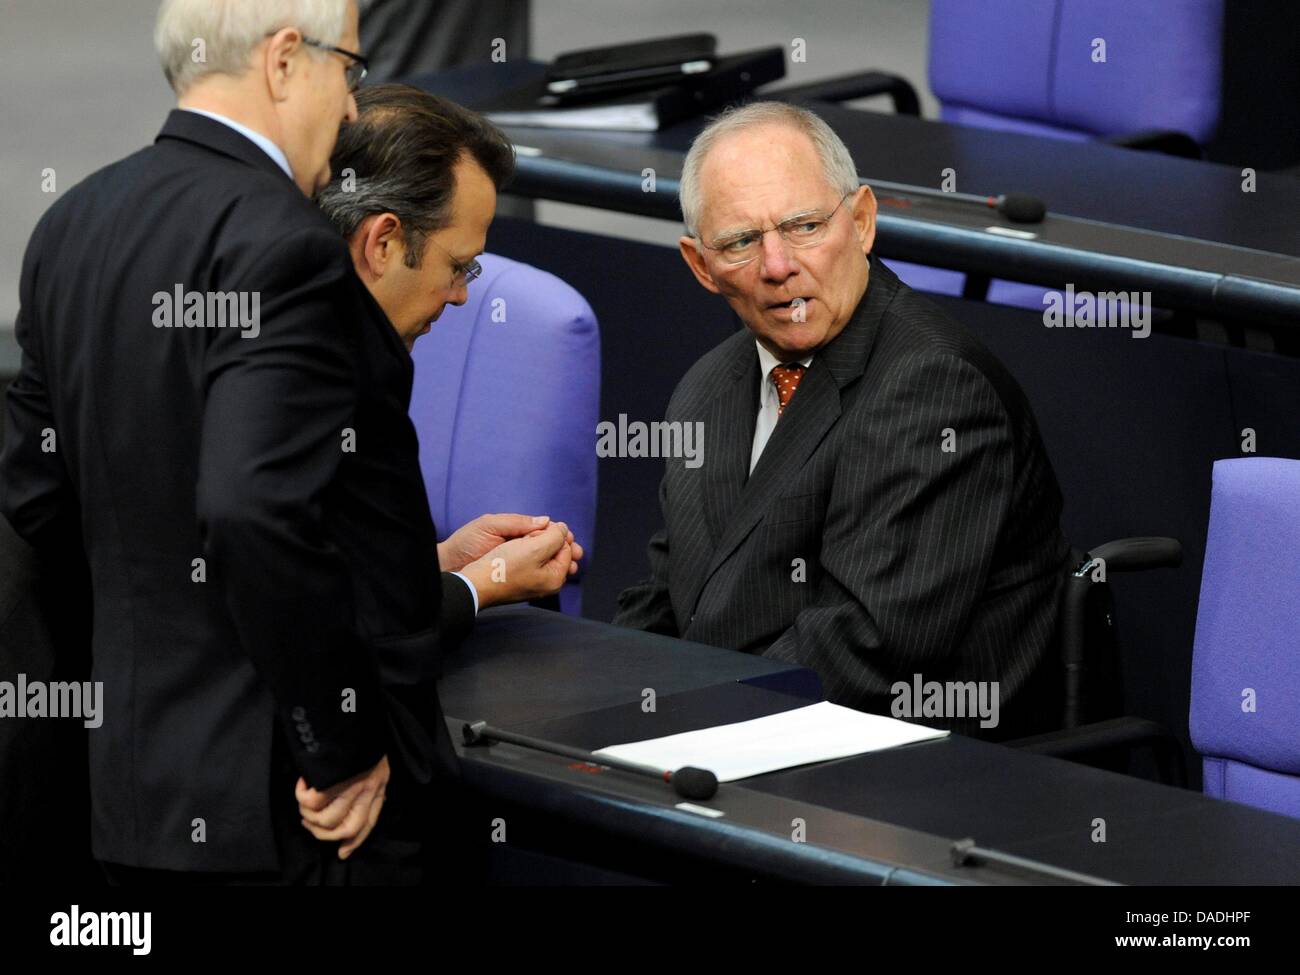 Rainer Bruederle (R), chairwoman of the FDP Bundestag parliamentary group, talks with German Minister of Finance, Wolfgang Schaueble, before the vote on strengthening the Euro rescue package at the Bundestag, Berlin, Germany, 26 October 2011. Merkel will give a speech on her positions regarding the negotiations in Brussels. Then a roll-call vote will be held on new instrumenst of t Stock Photo